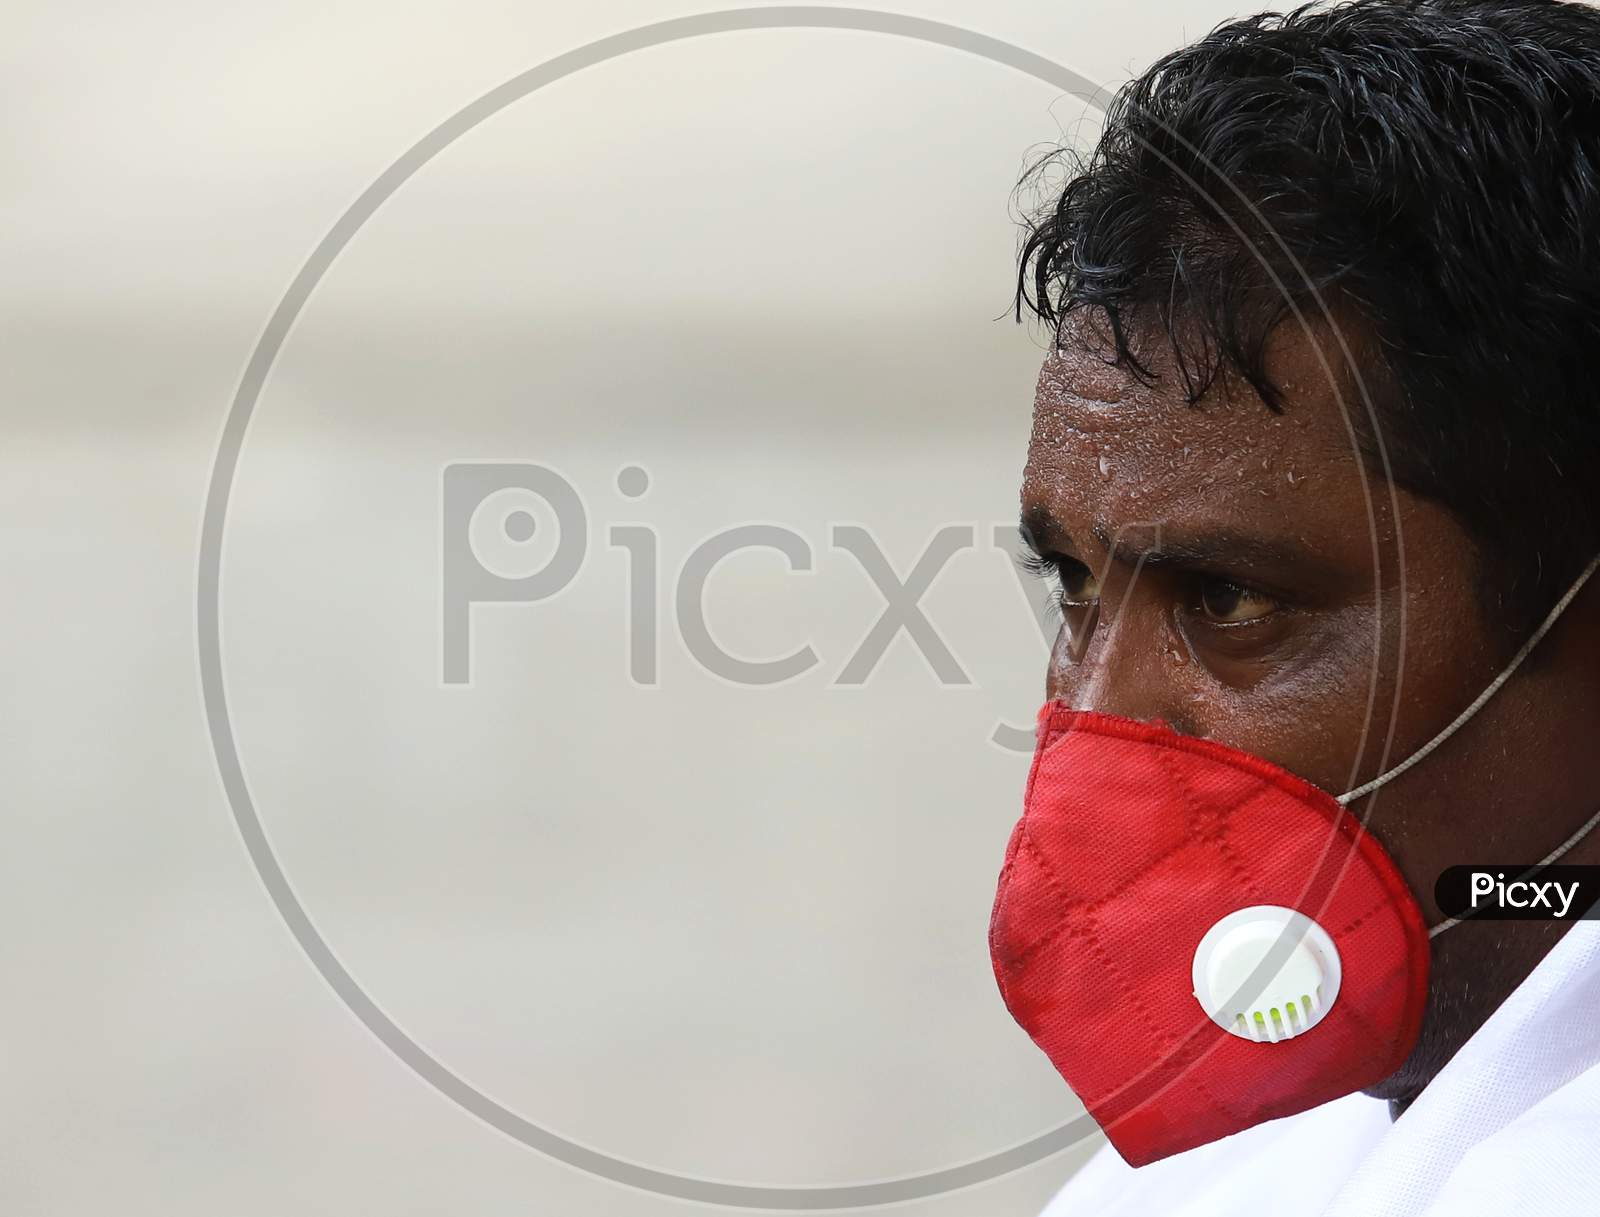 A hearse van driver sweats during the funeral of a Covid-19 patient at Nigambodh Ghat, Delhi on July 06, 2020